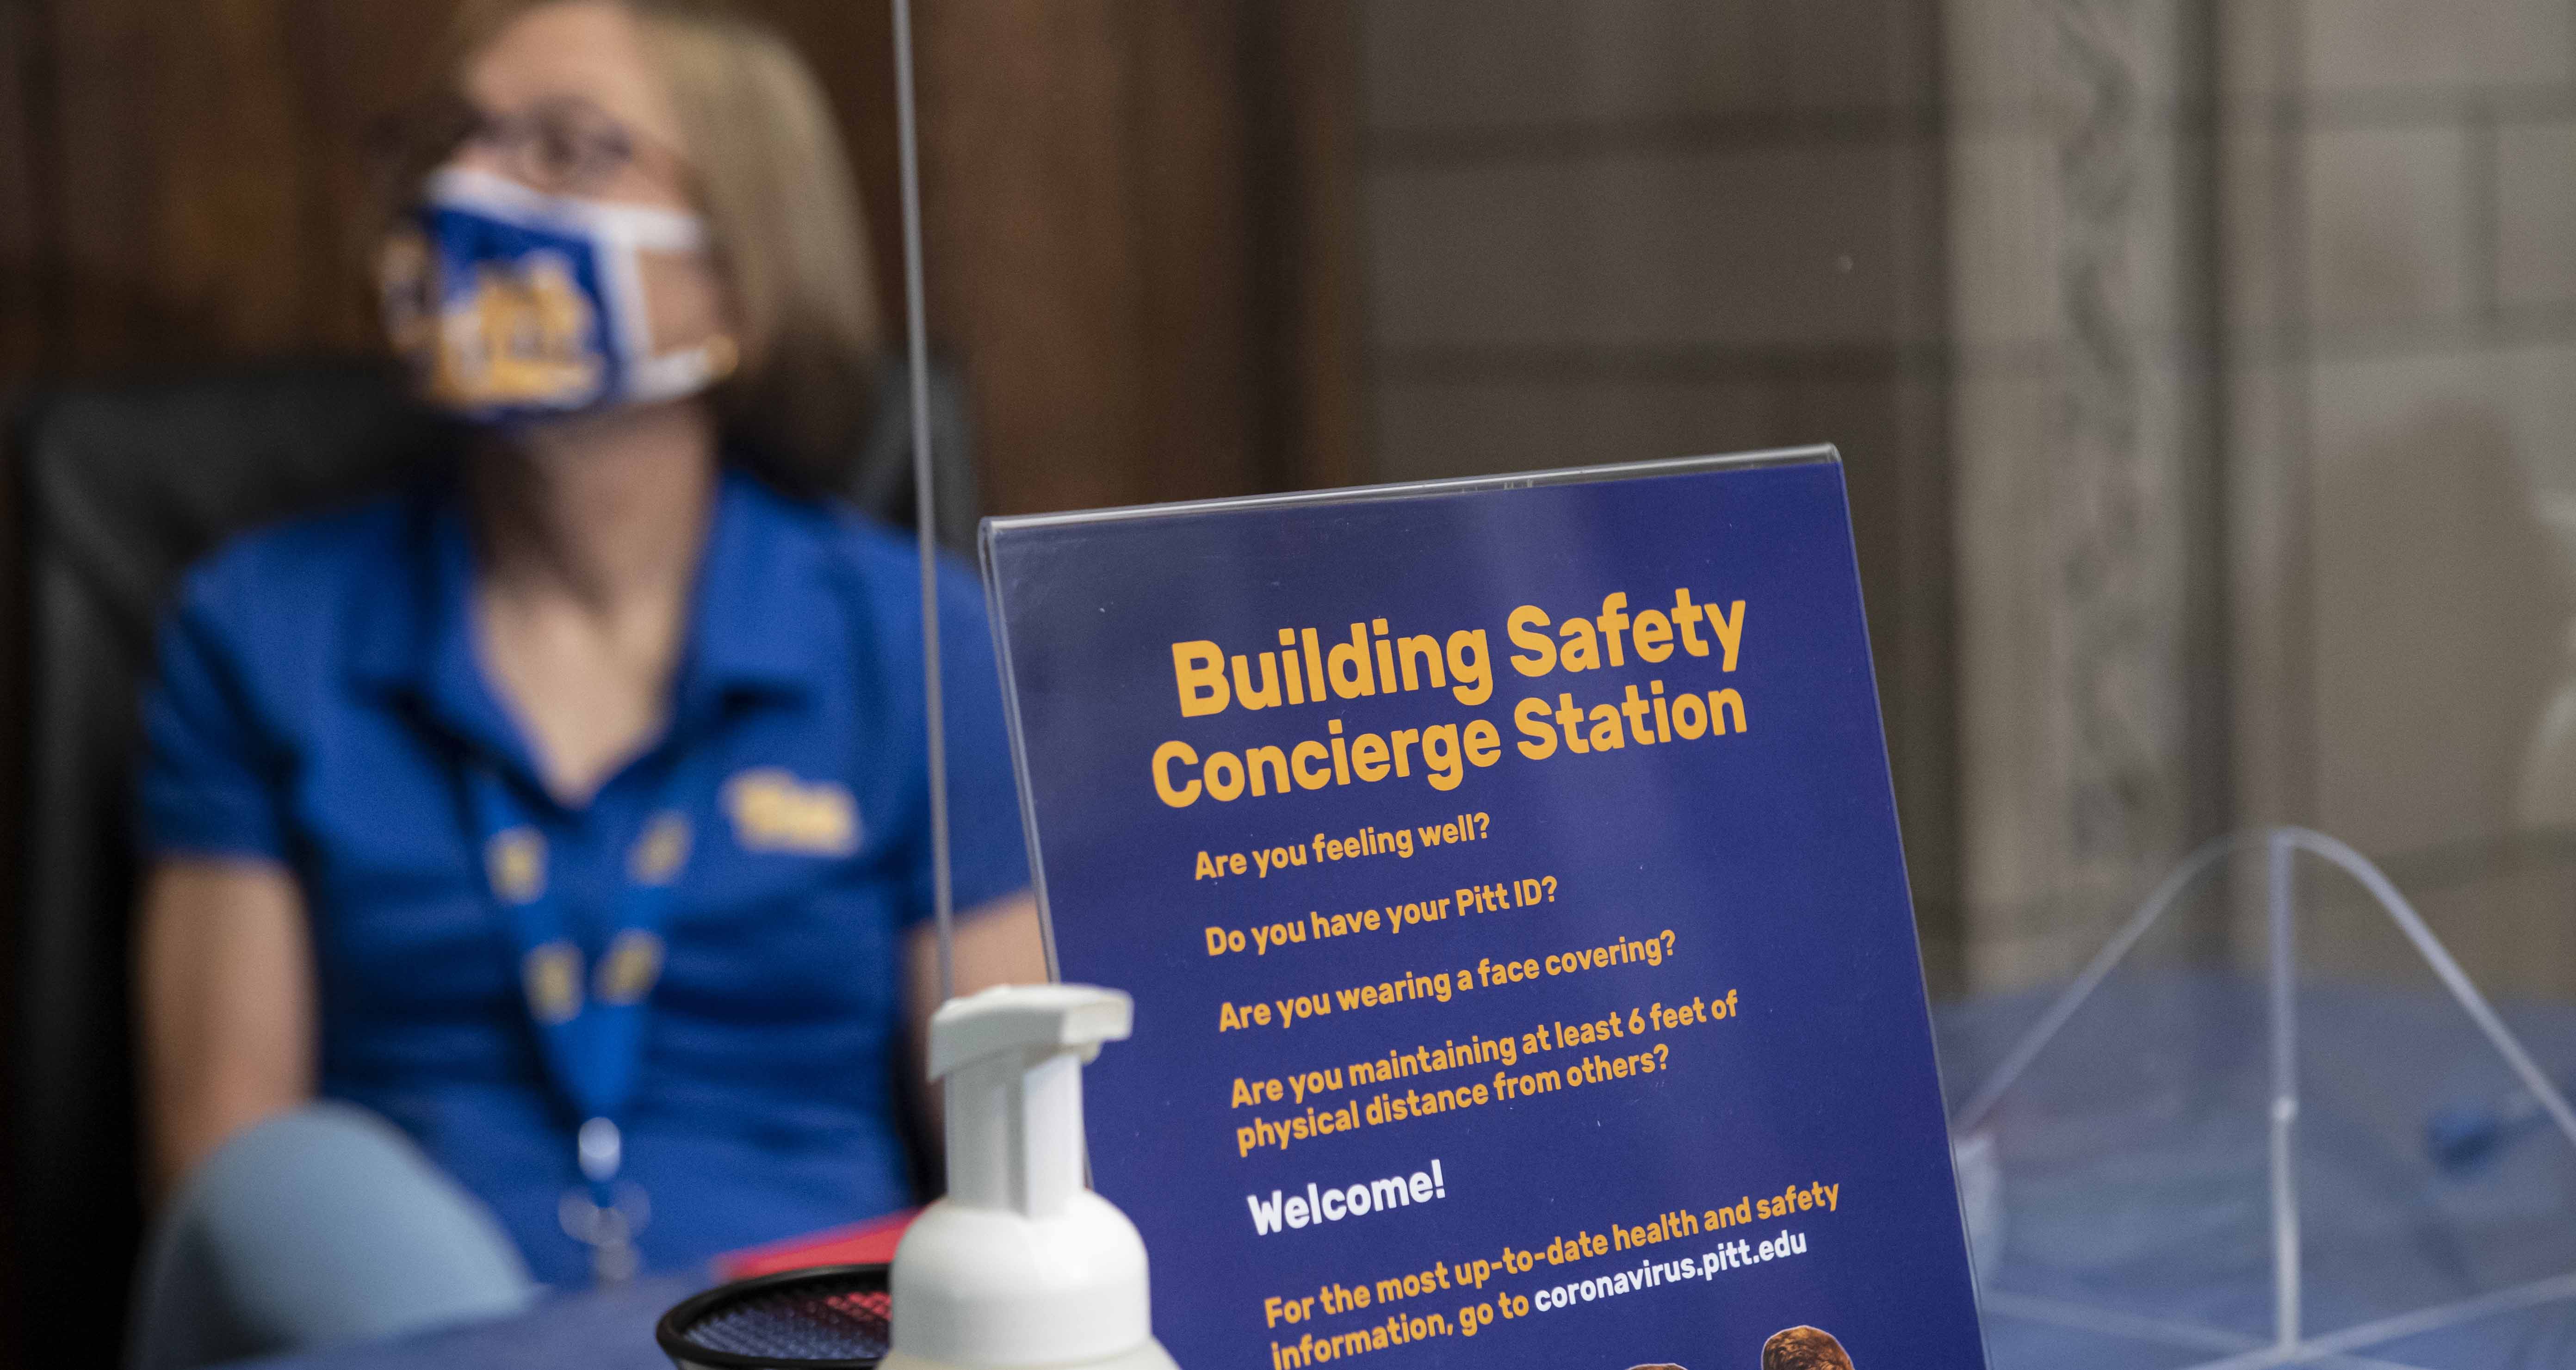 Sign about building safety rules with blurred person in background